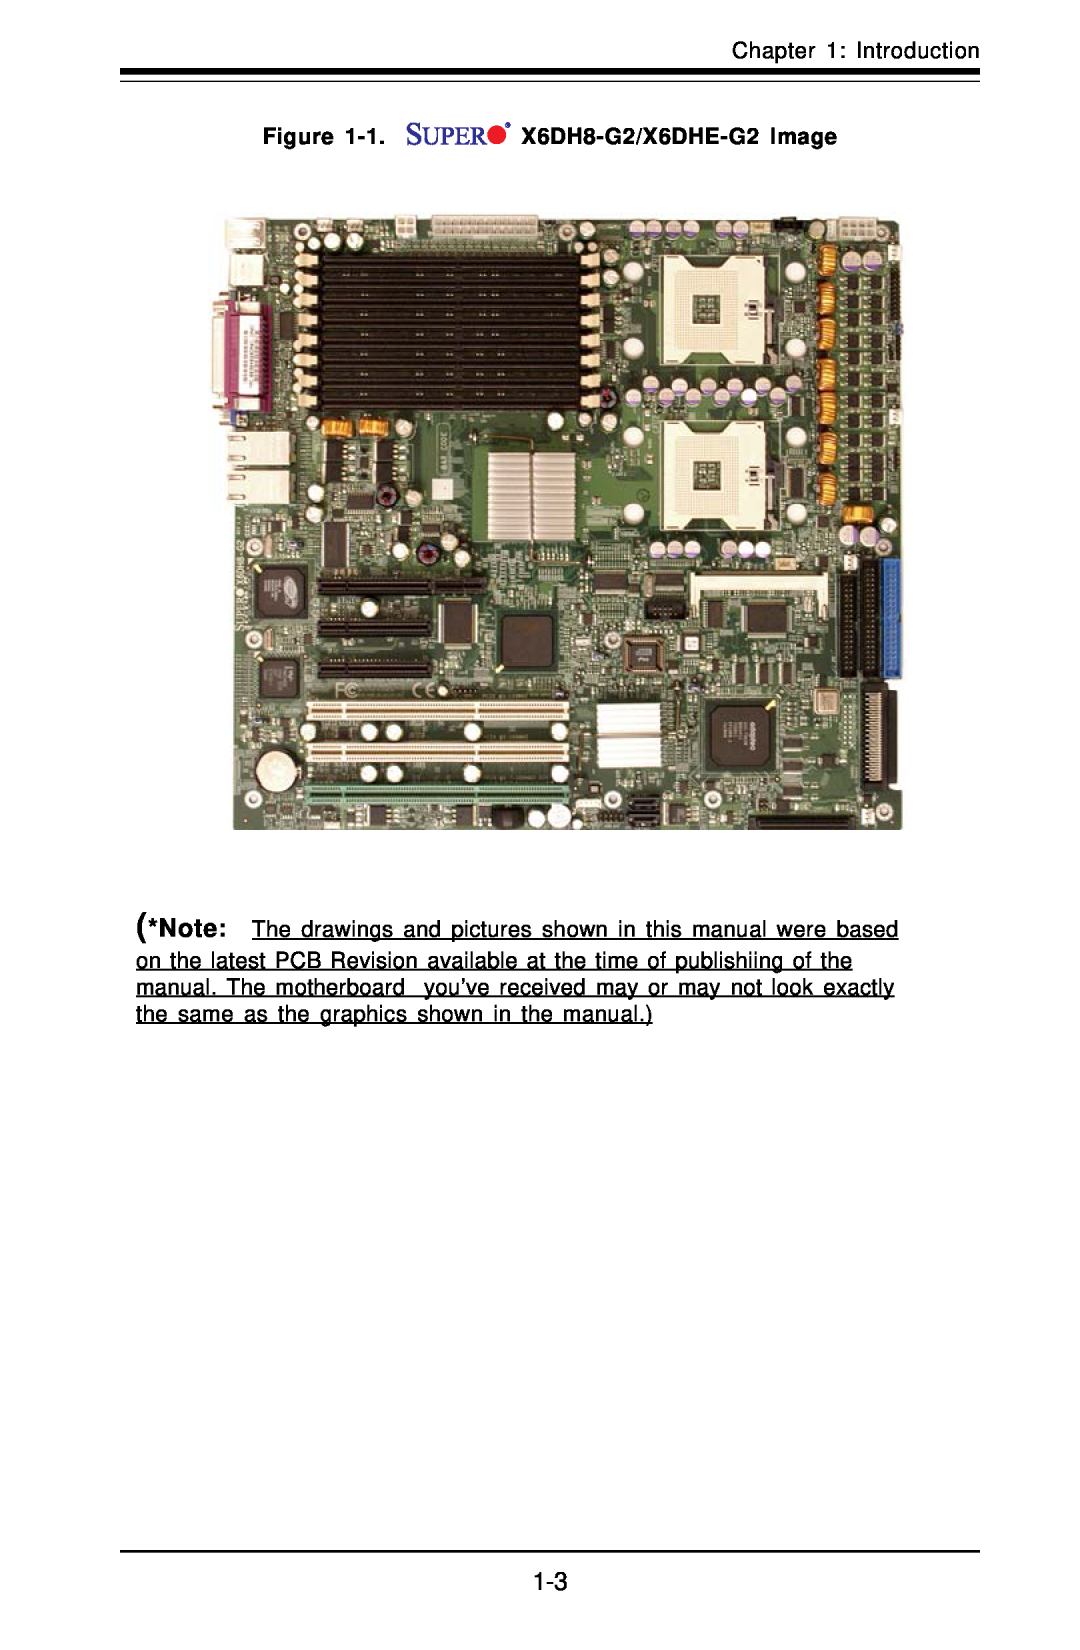 SUPER MICRO Computer manual Introduction, 1. X6DH8-G2/X6DHE-G2 Image 